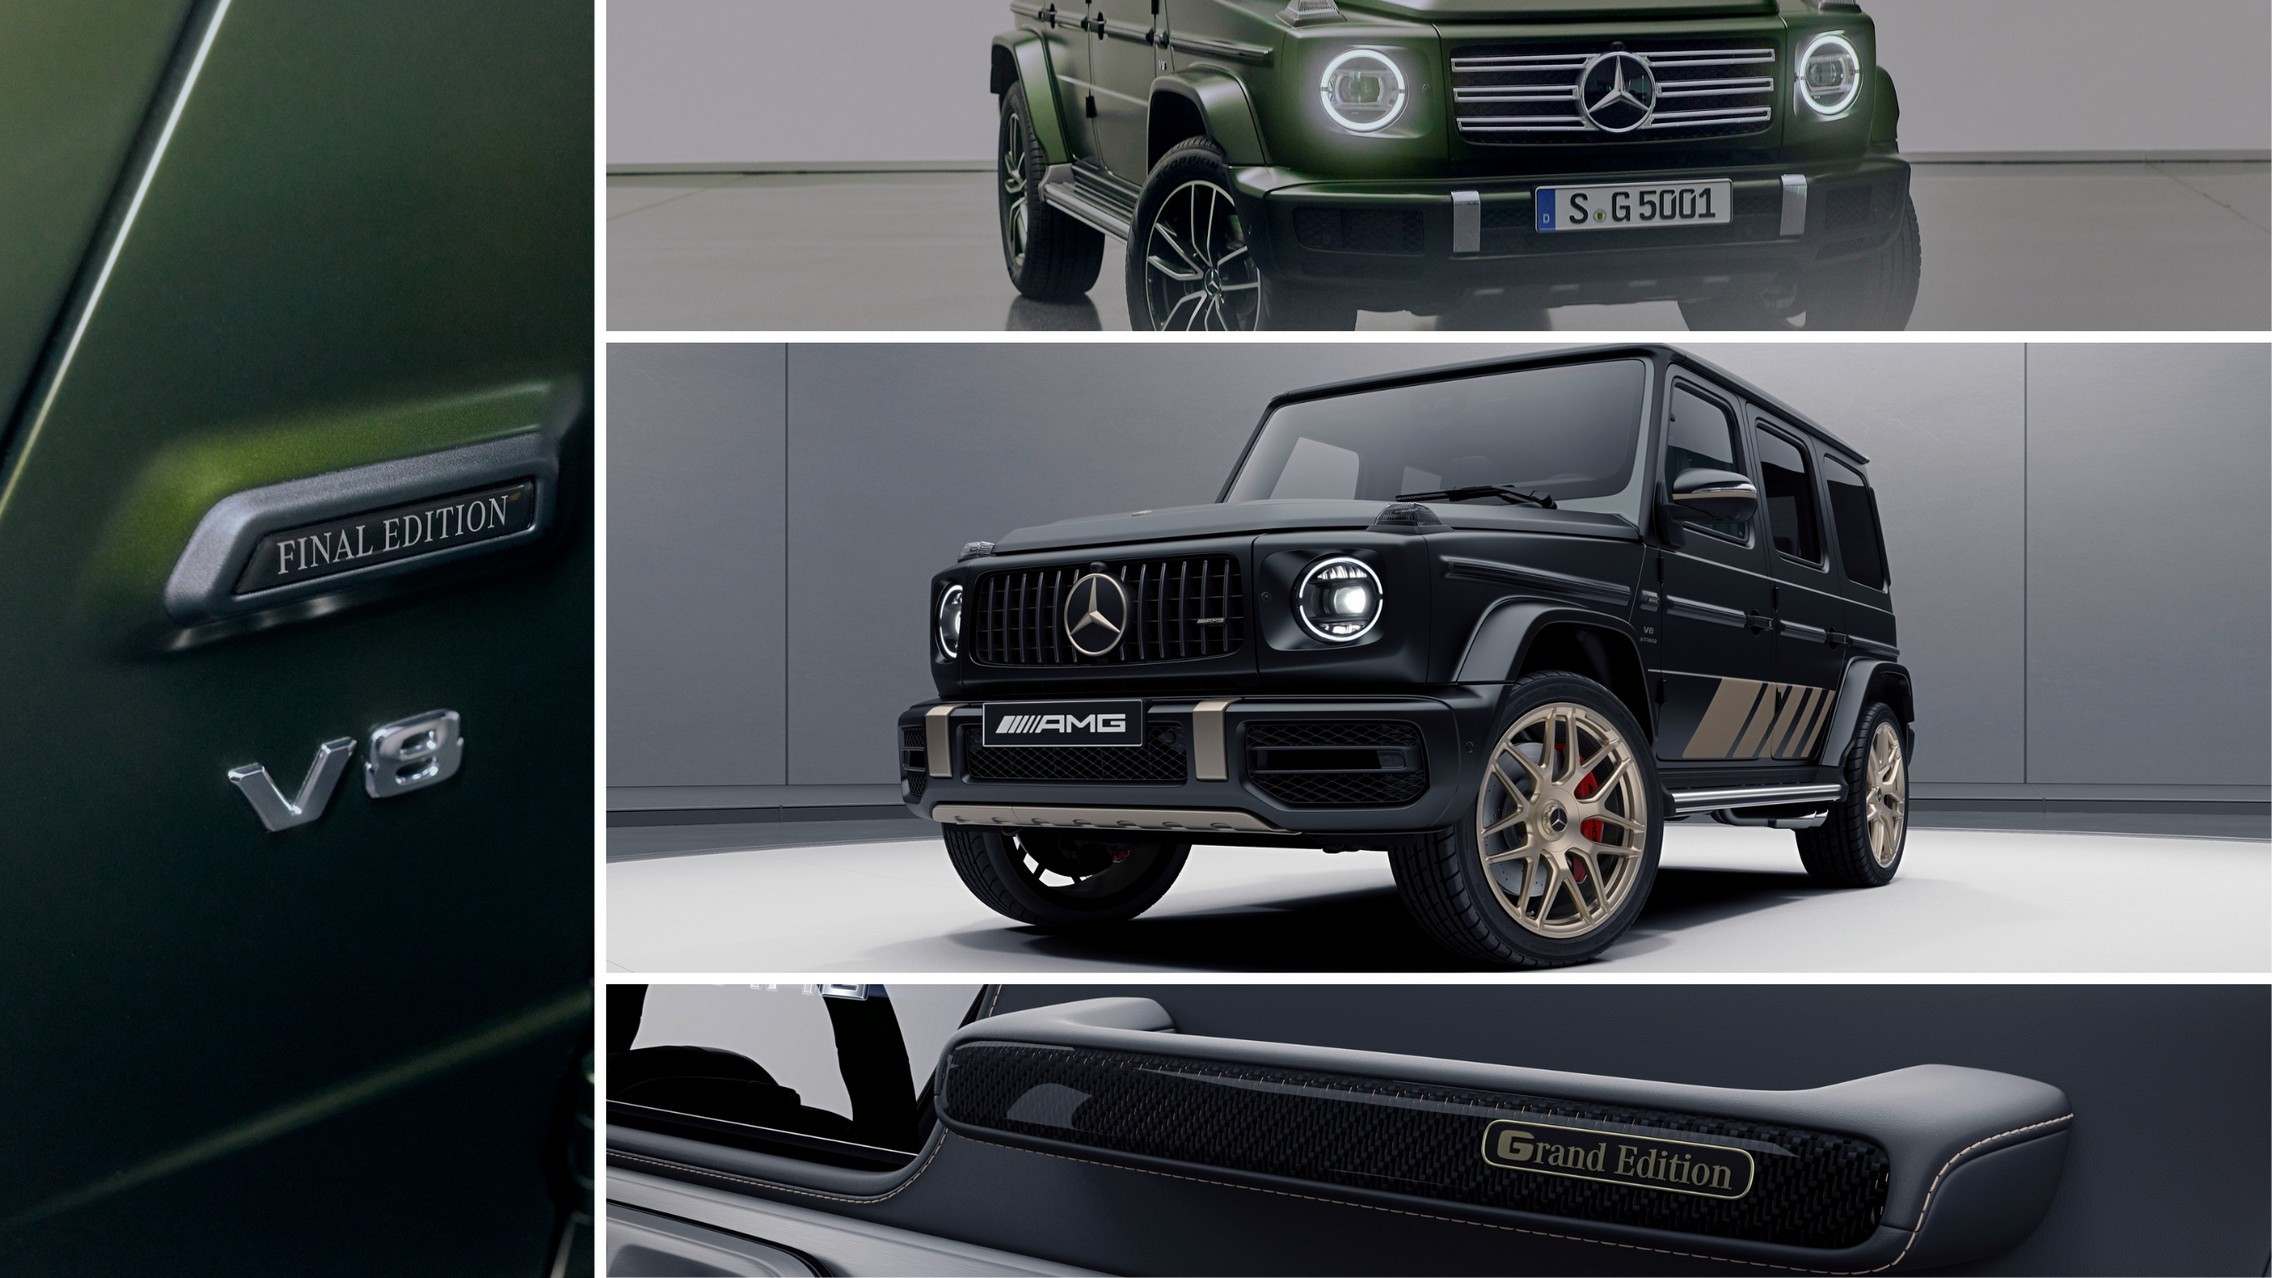 The Mercedes-AMG G 63 “Grand Edition”: Special model in matte